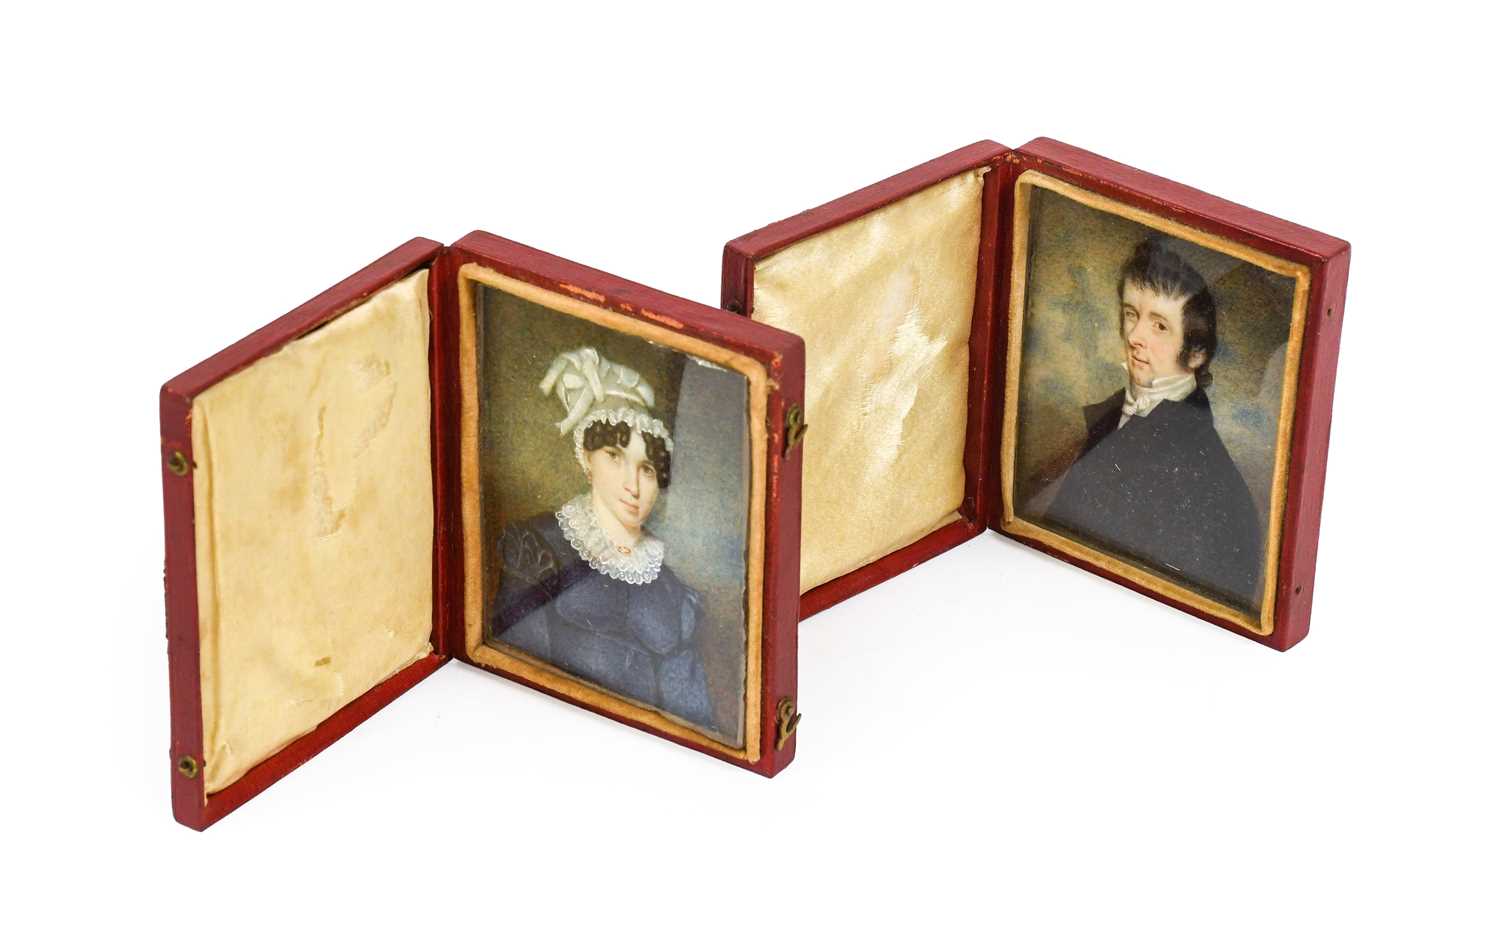 English School (19th century): Miniature Portraits of a Lady and Gentleman, bust length, she wearing